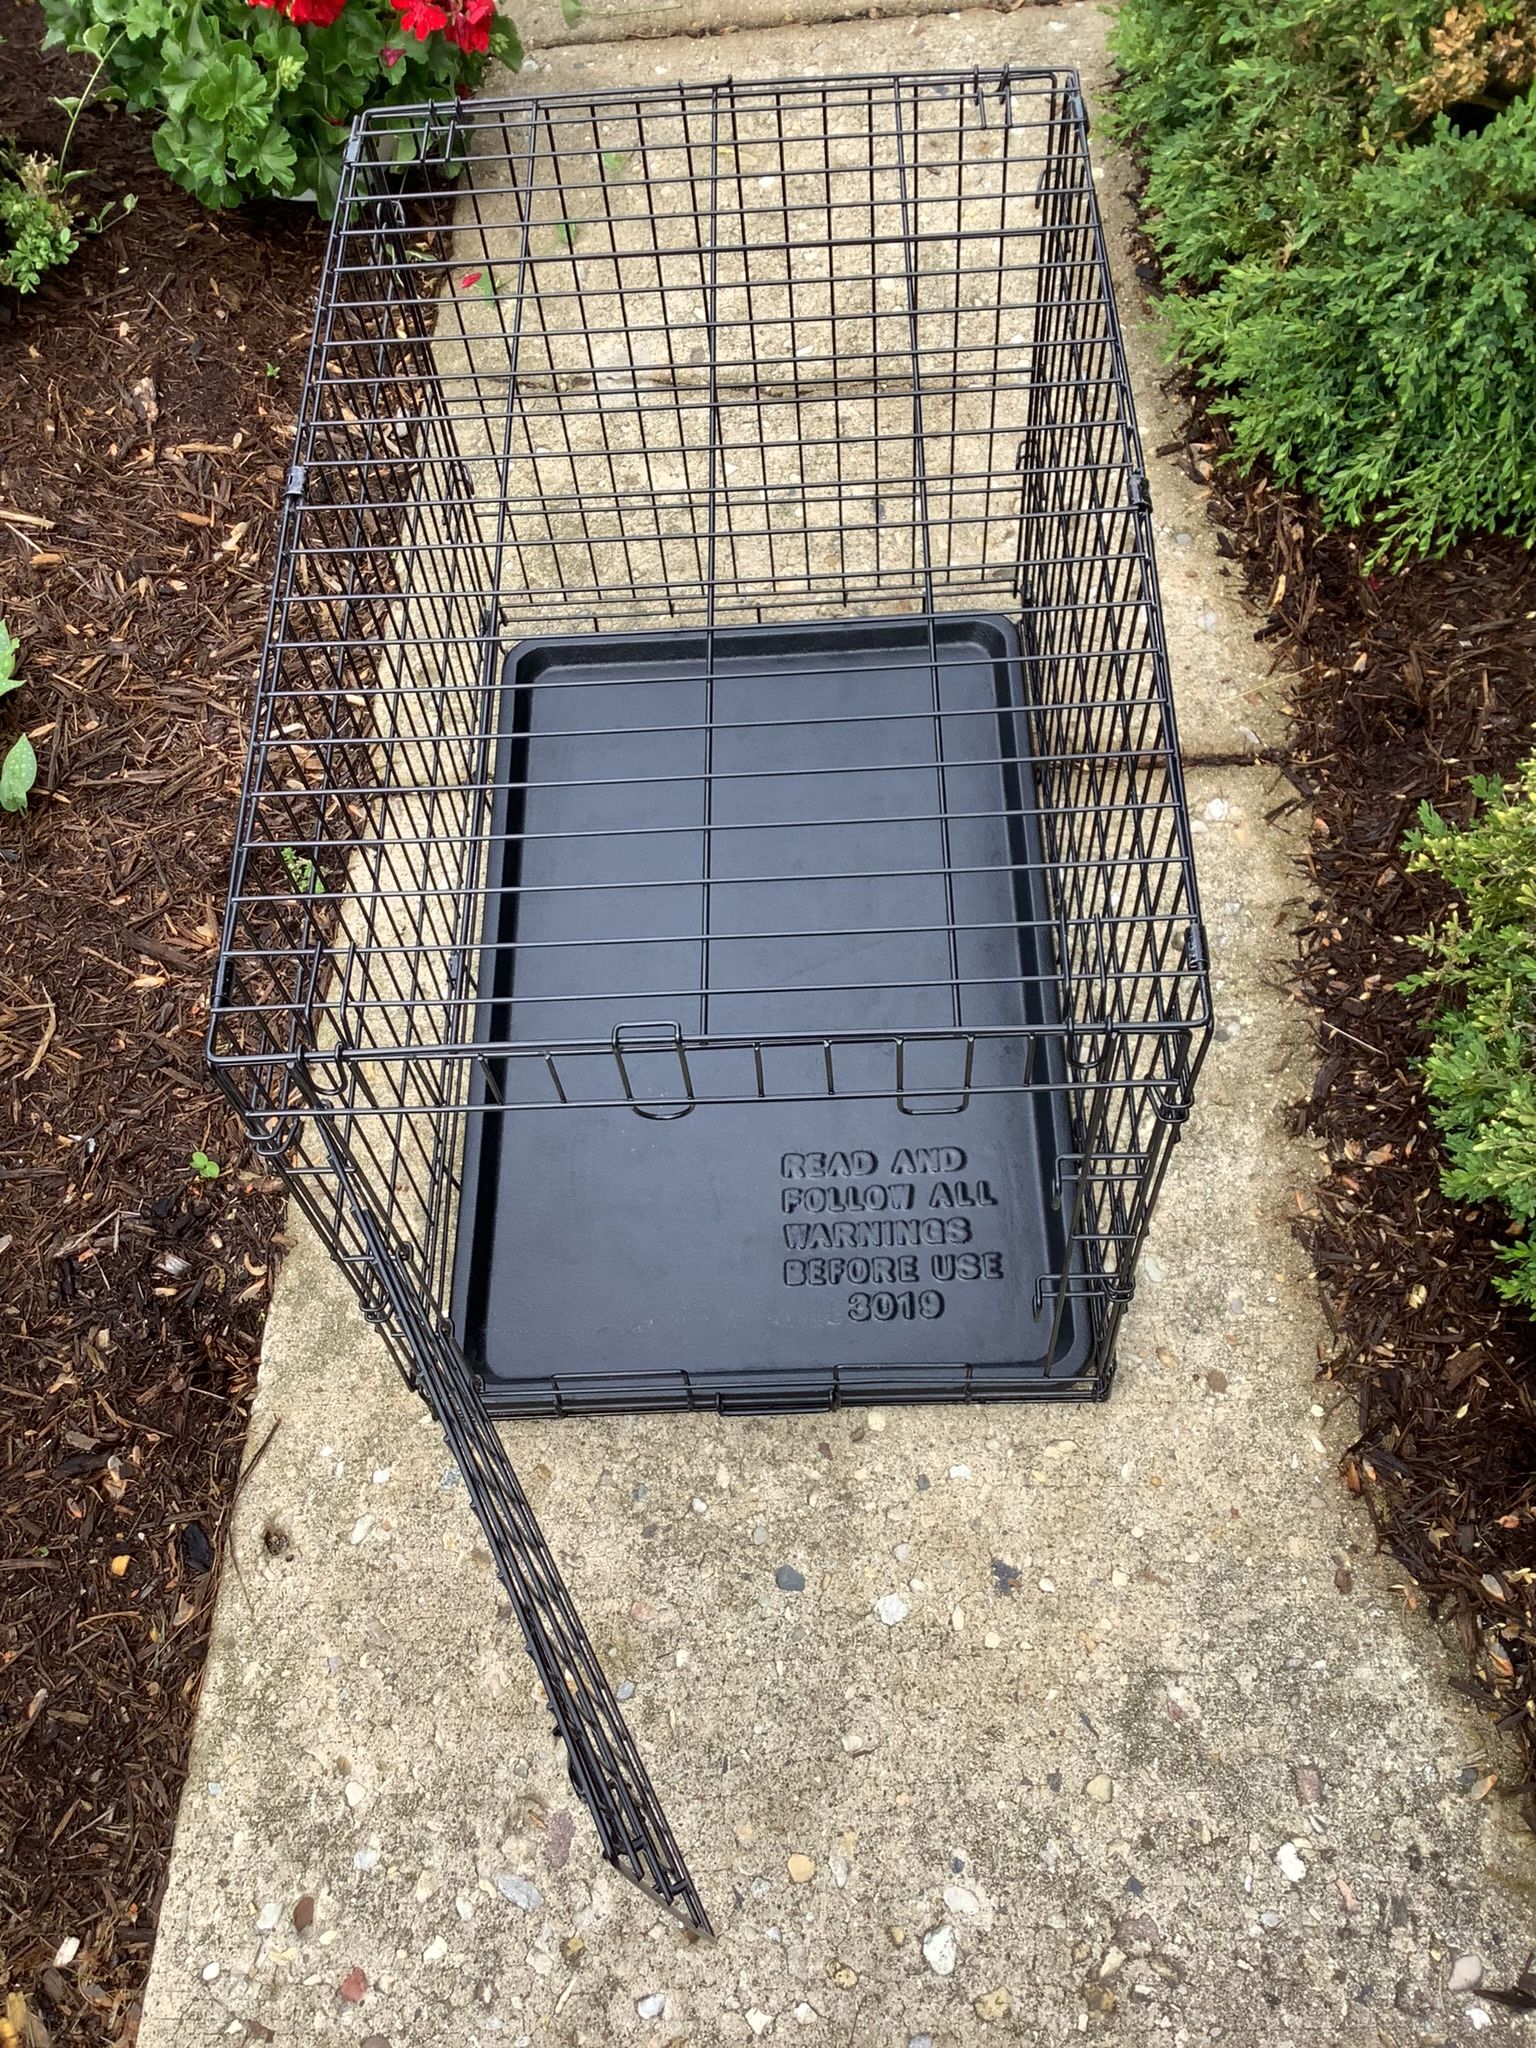 Dog Crate For A Medium-Size Dog